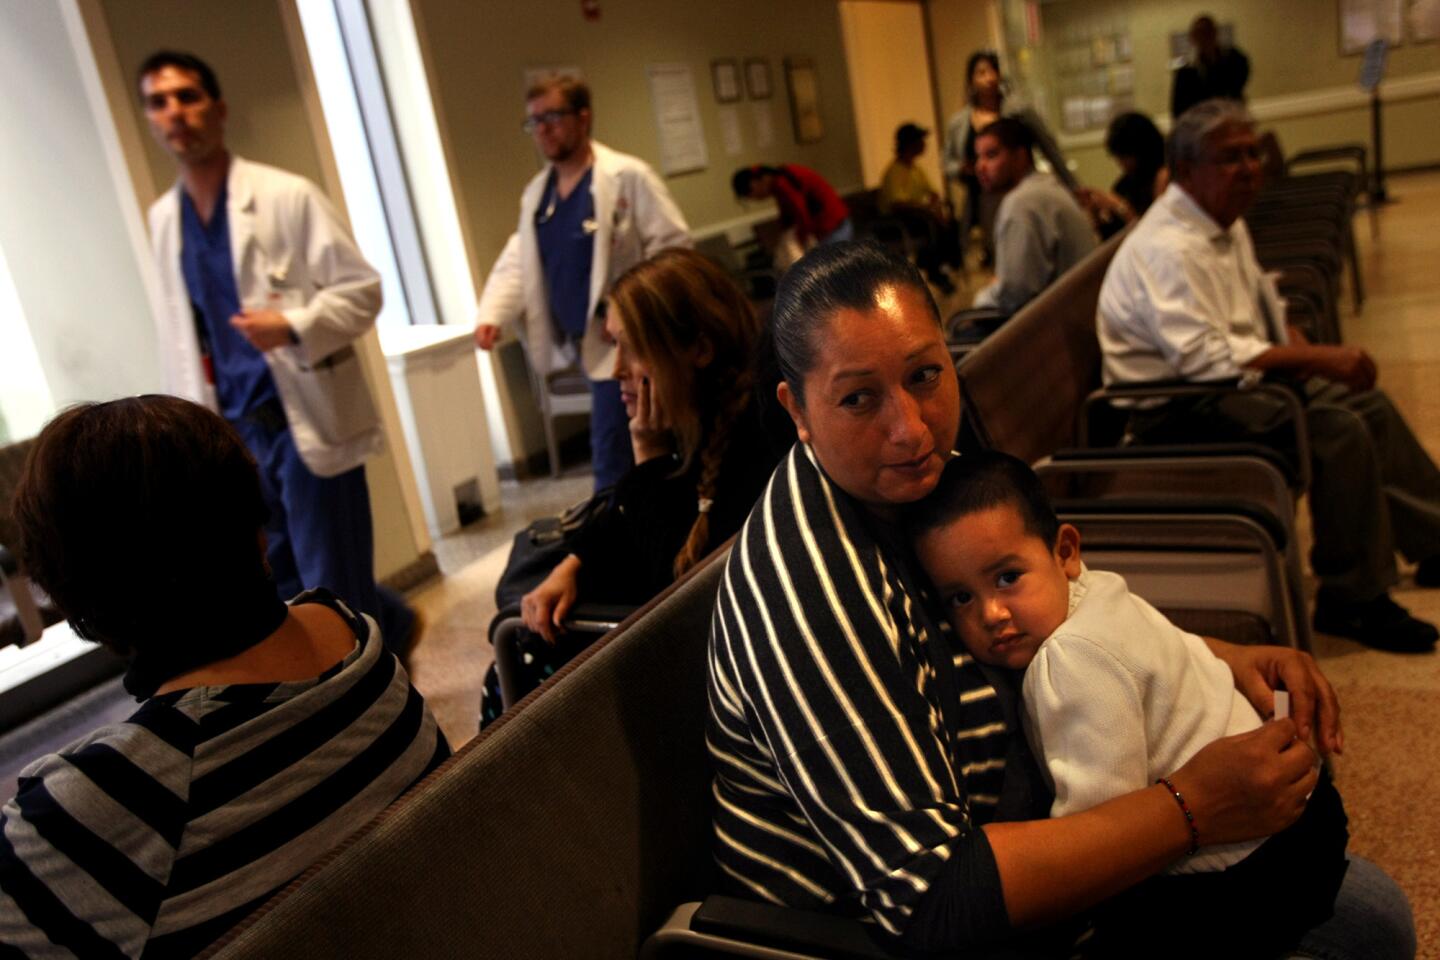 Medi-Cal patient Elizabeth Martinez, and her 2-year-old son Maximiliano, wait to see a doctor in the emergency room of L.A. County-USC Medical Center in Los Angeles. This is the first day for signups for insurance coverage through the Affordable Care Act -- also known as Obamacare. Martinez said that she knew very little about the Affordable Care Act.